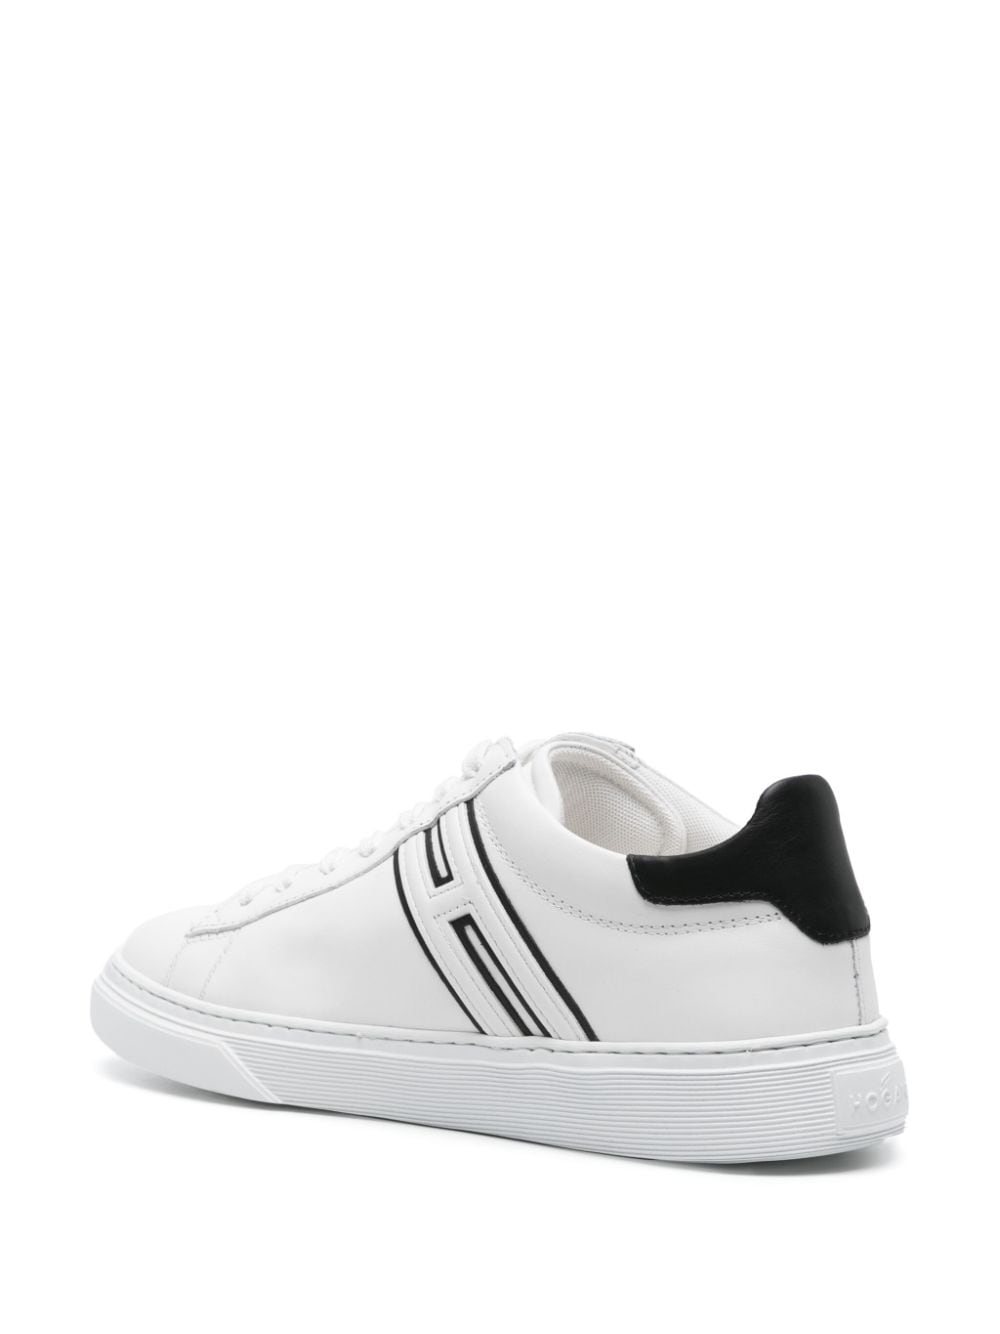 H365 sneaker in white leather